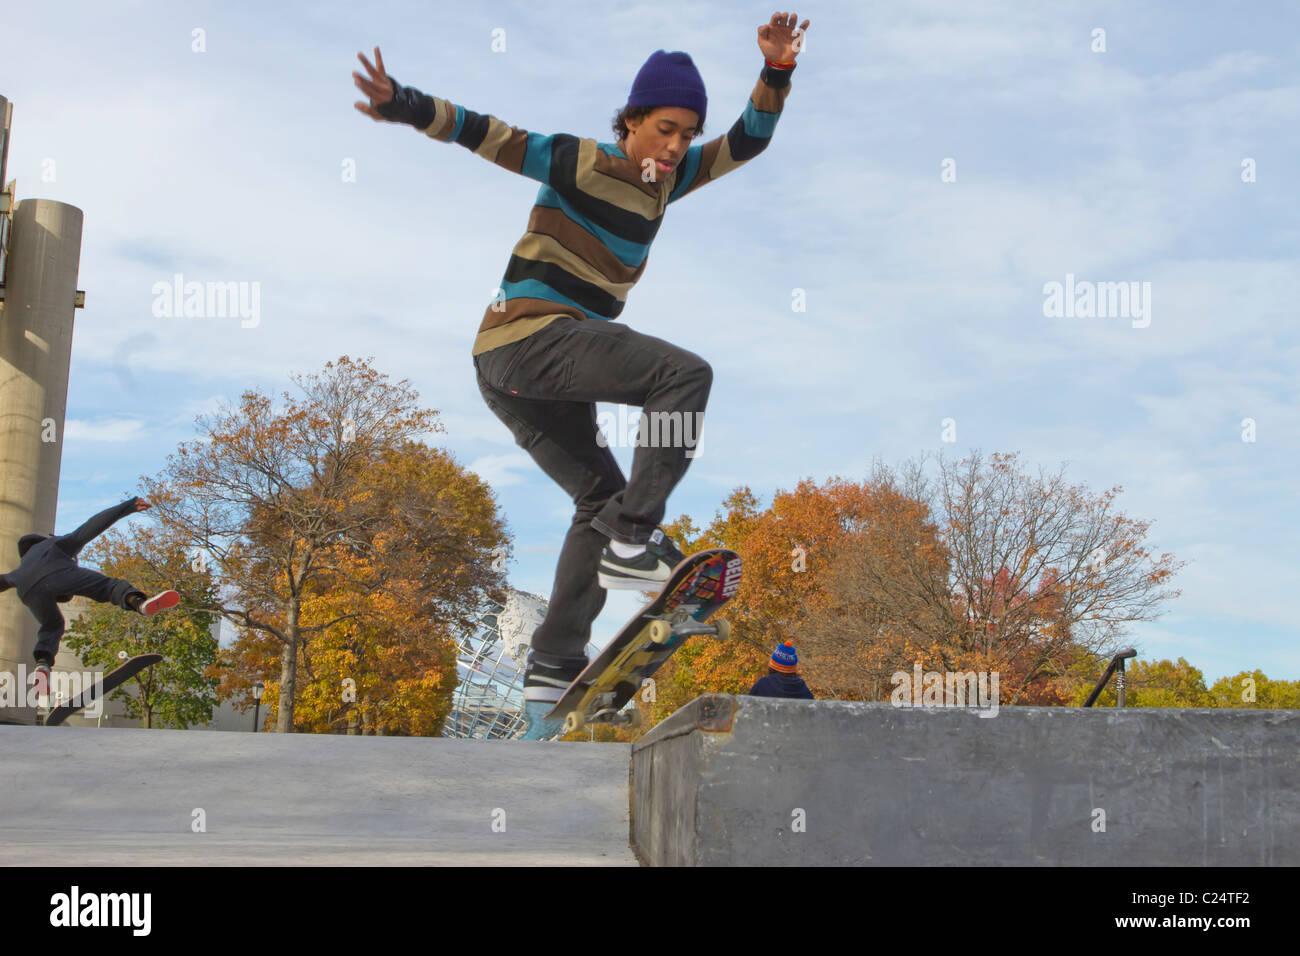 Young skateboarders at Maloof Skatepark in Flushing  Meadow Park Stock Photo